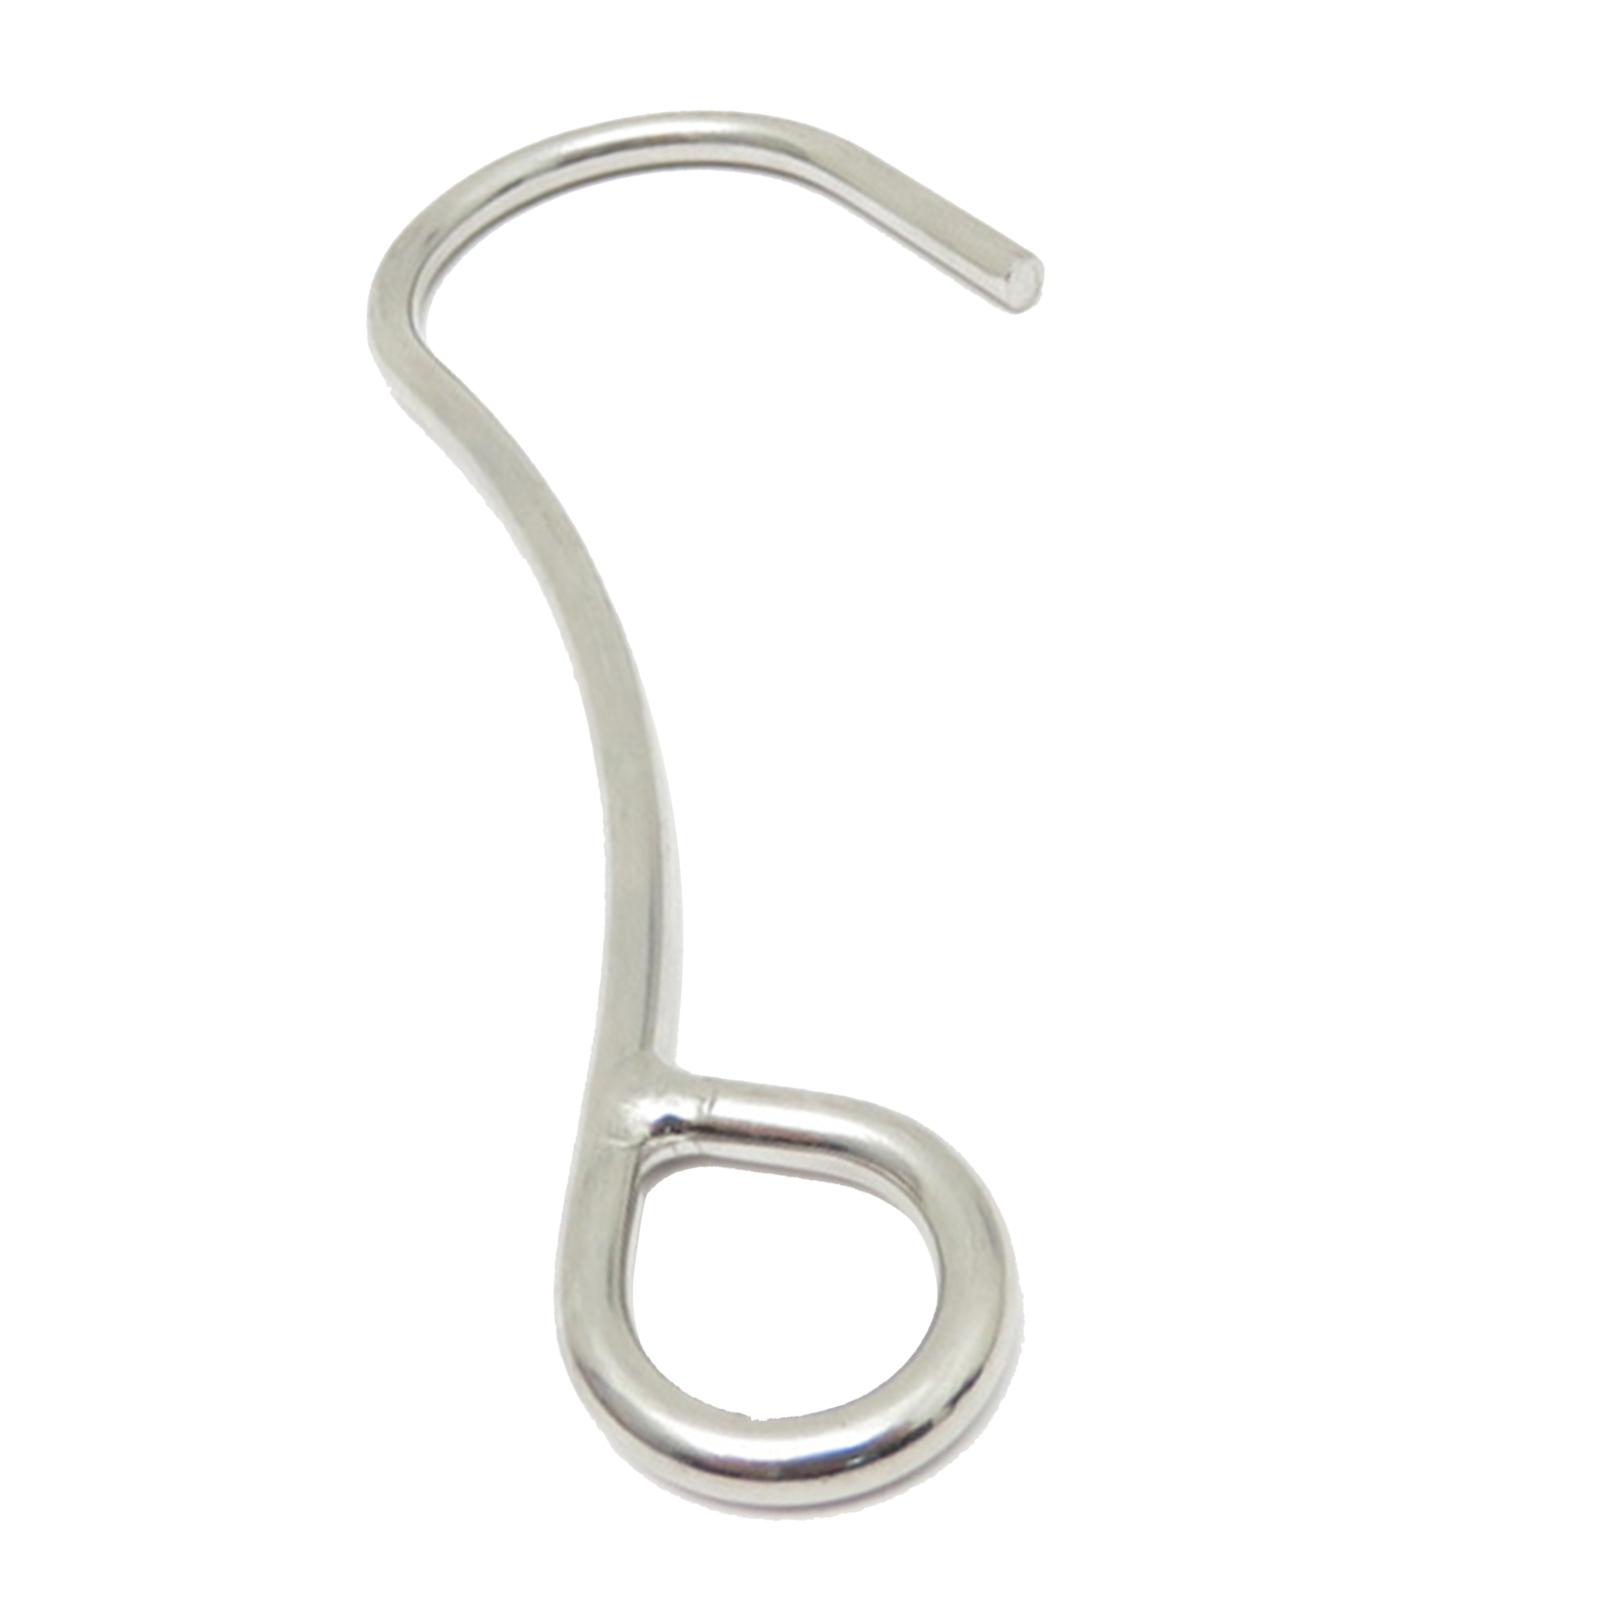 Scuba Diving Reef Hook Durable for Underwater Sports Drift Diving Free Dive